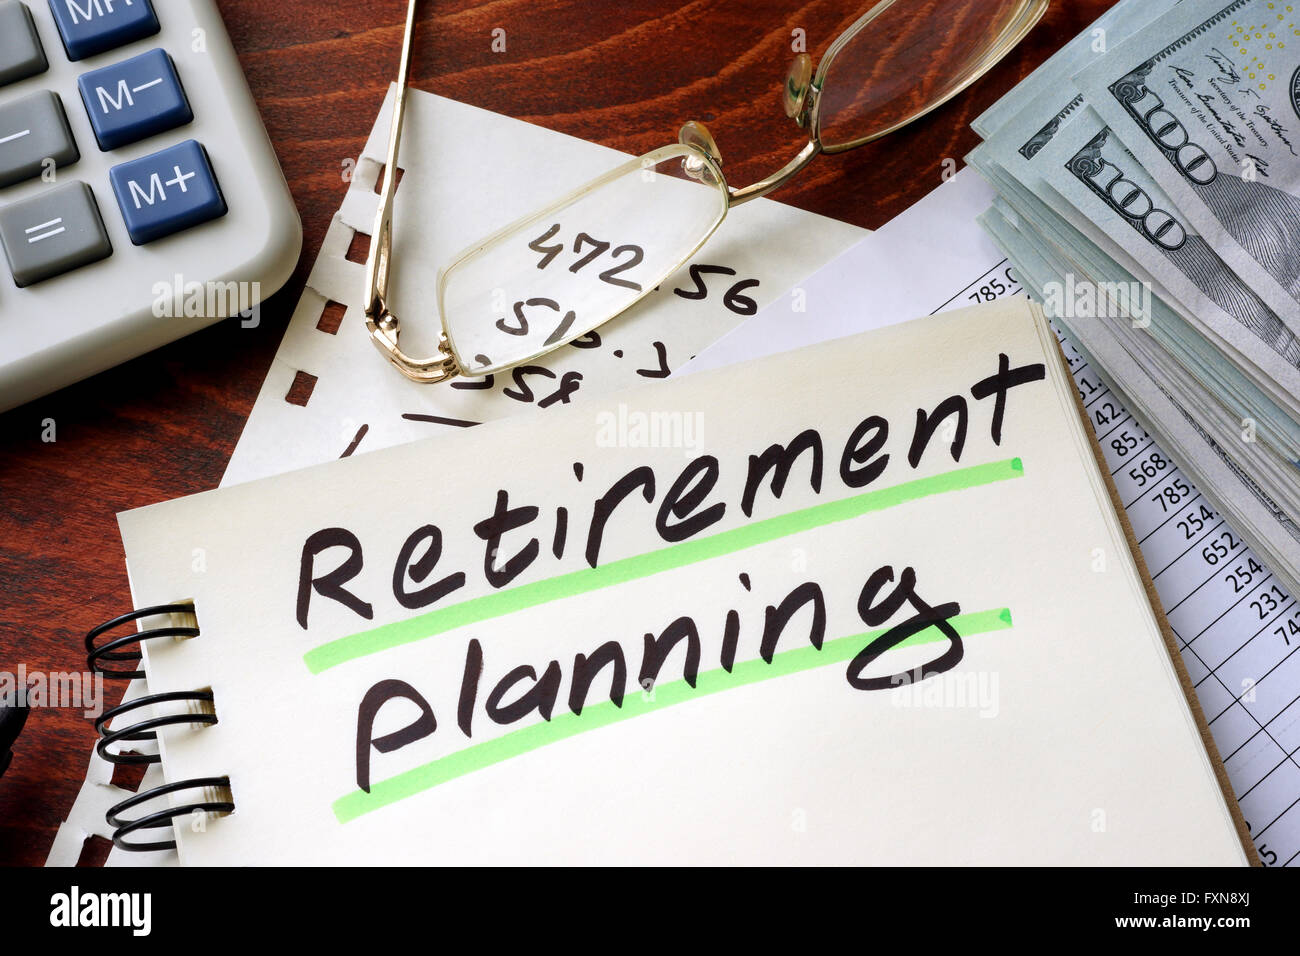 Retirement planning written on a notepad. Savings concept. Stock Photo